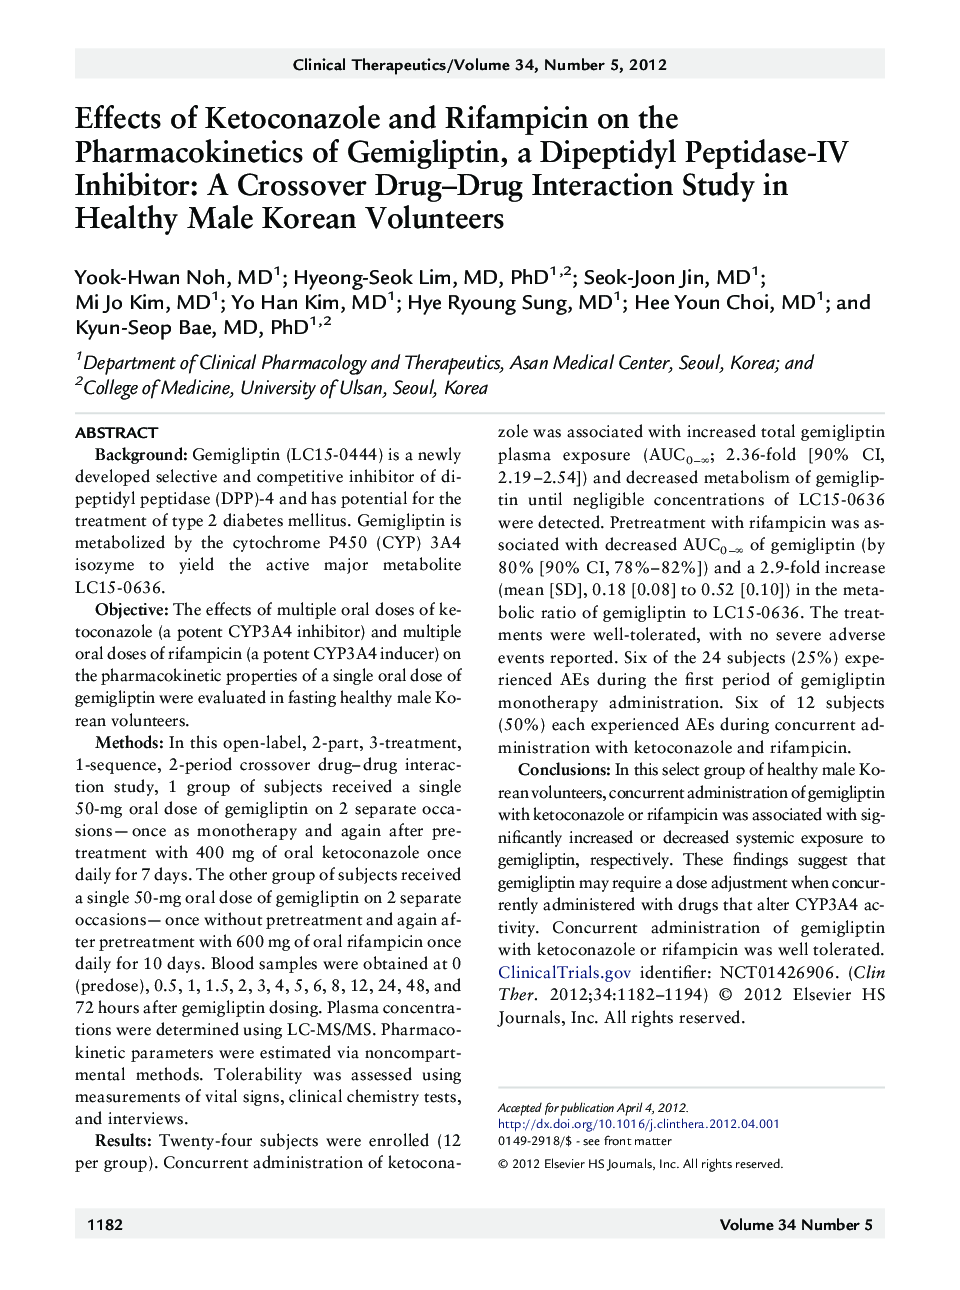 Effects of Ketoconazole and Rifampicin on the Pharmacokinetics of Gemigliptin, a Dipeptidyl Peptidase-IV Inhibitor: A Crossover Drug–Drug Interaction Study in Healthy Male Korean Volunteers